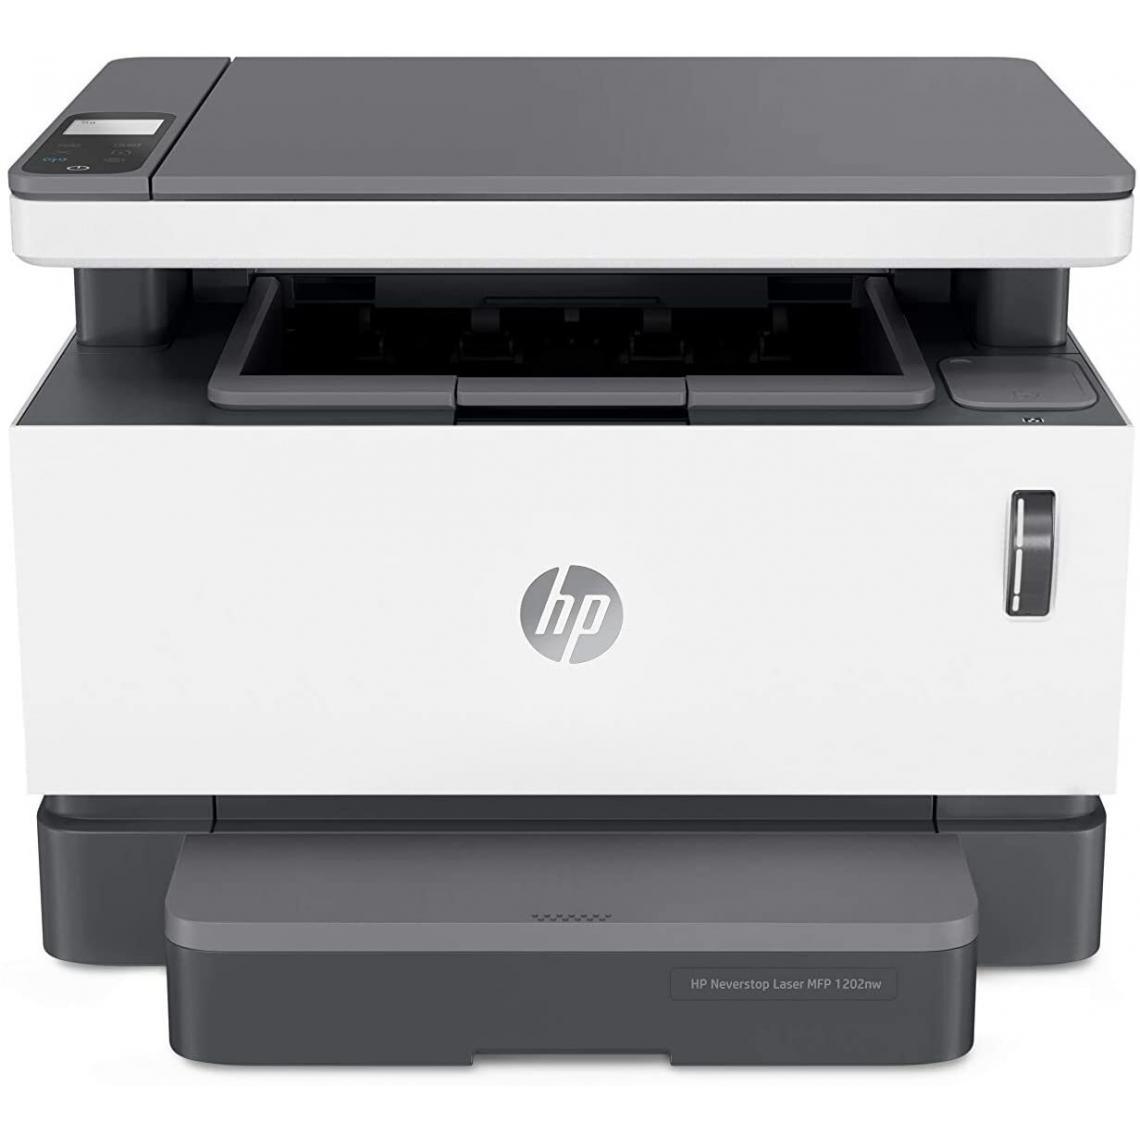 Hp - Neverstop 1202nw - Wi-Fi - 5HG93A - Imprimante Laser